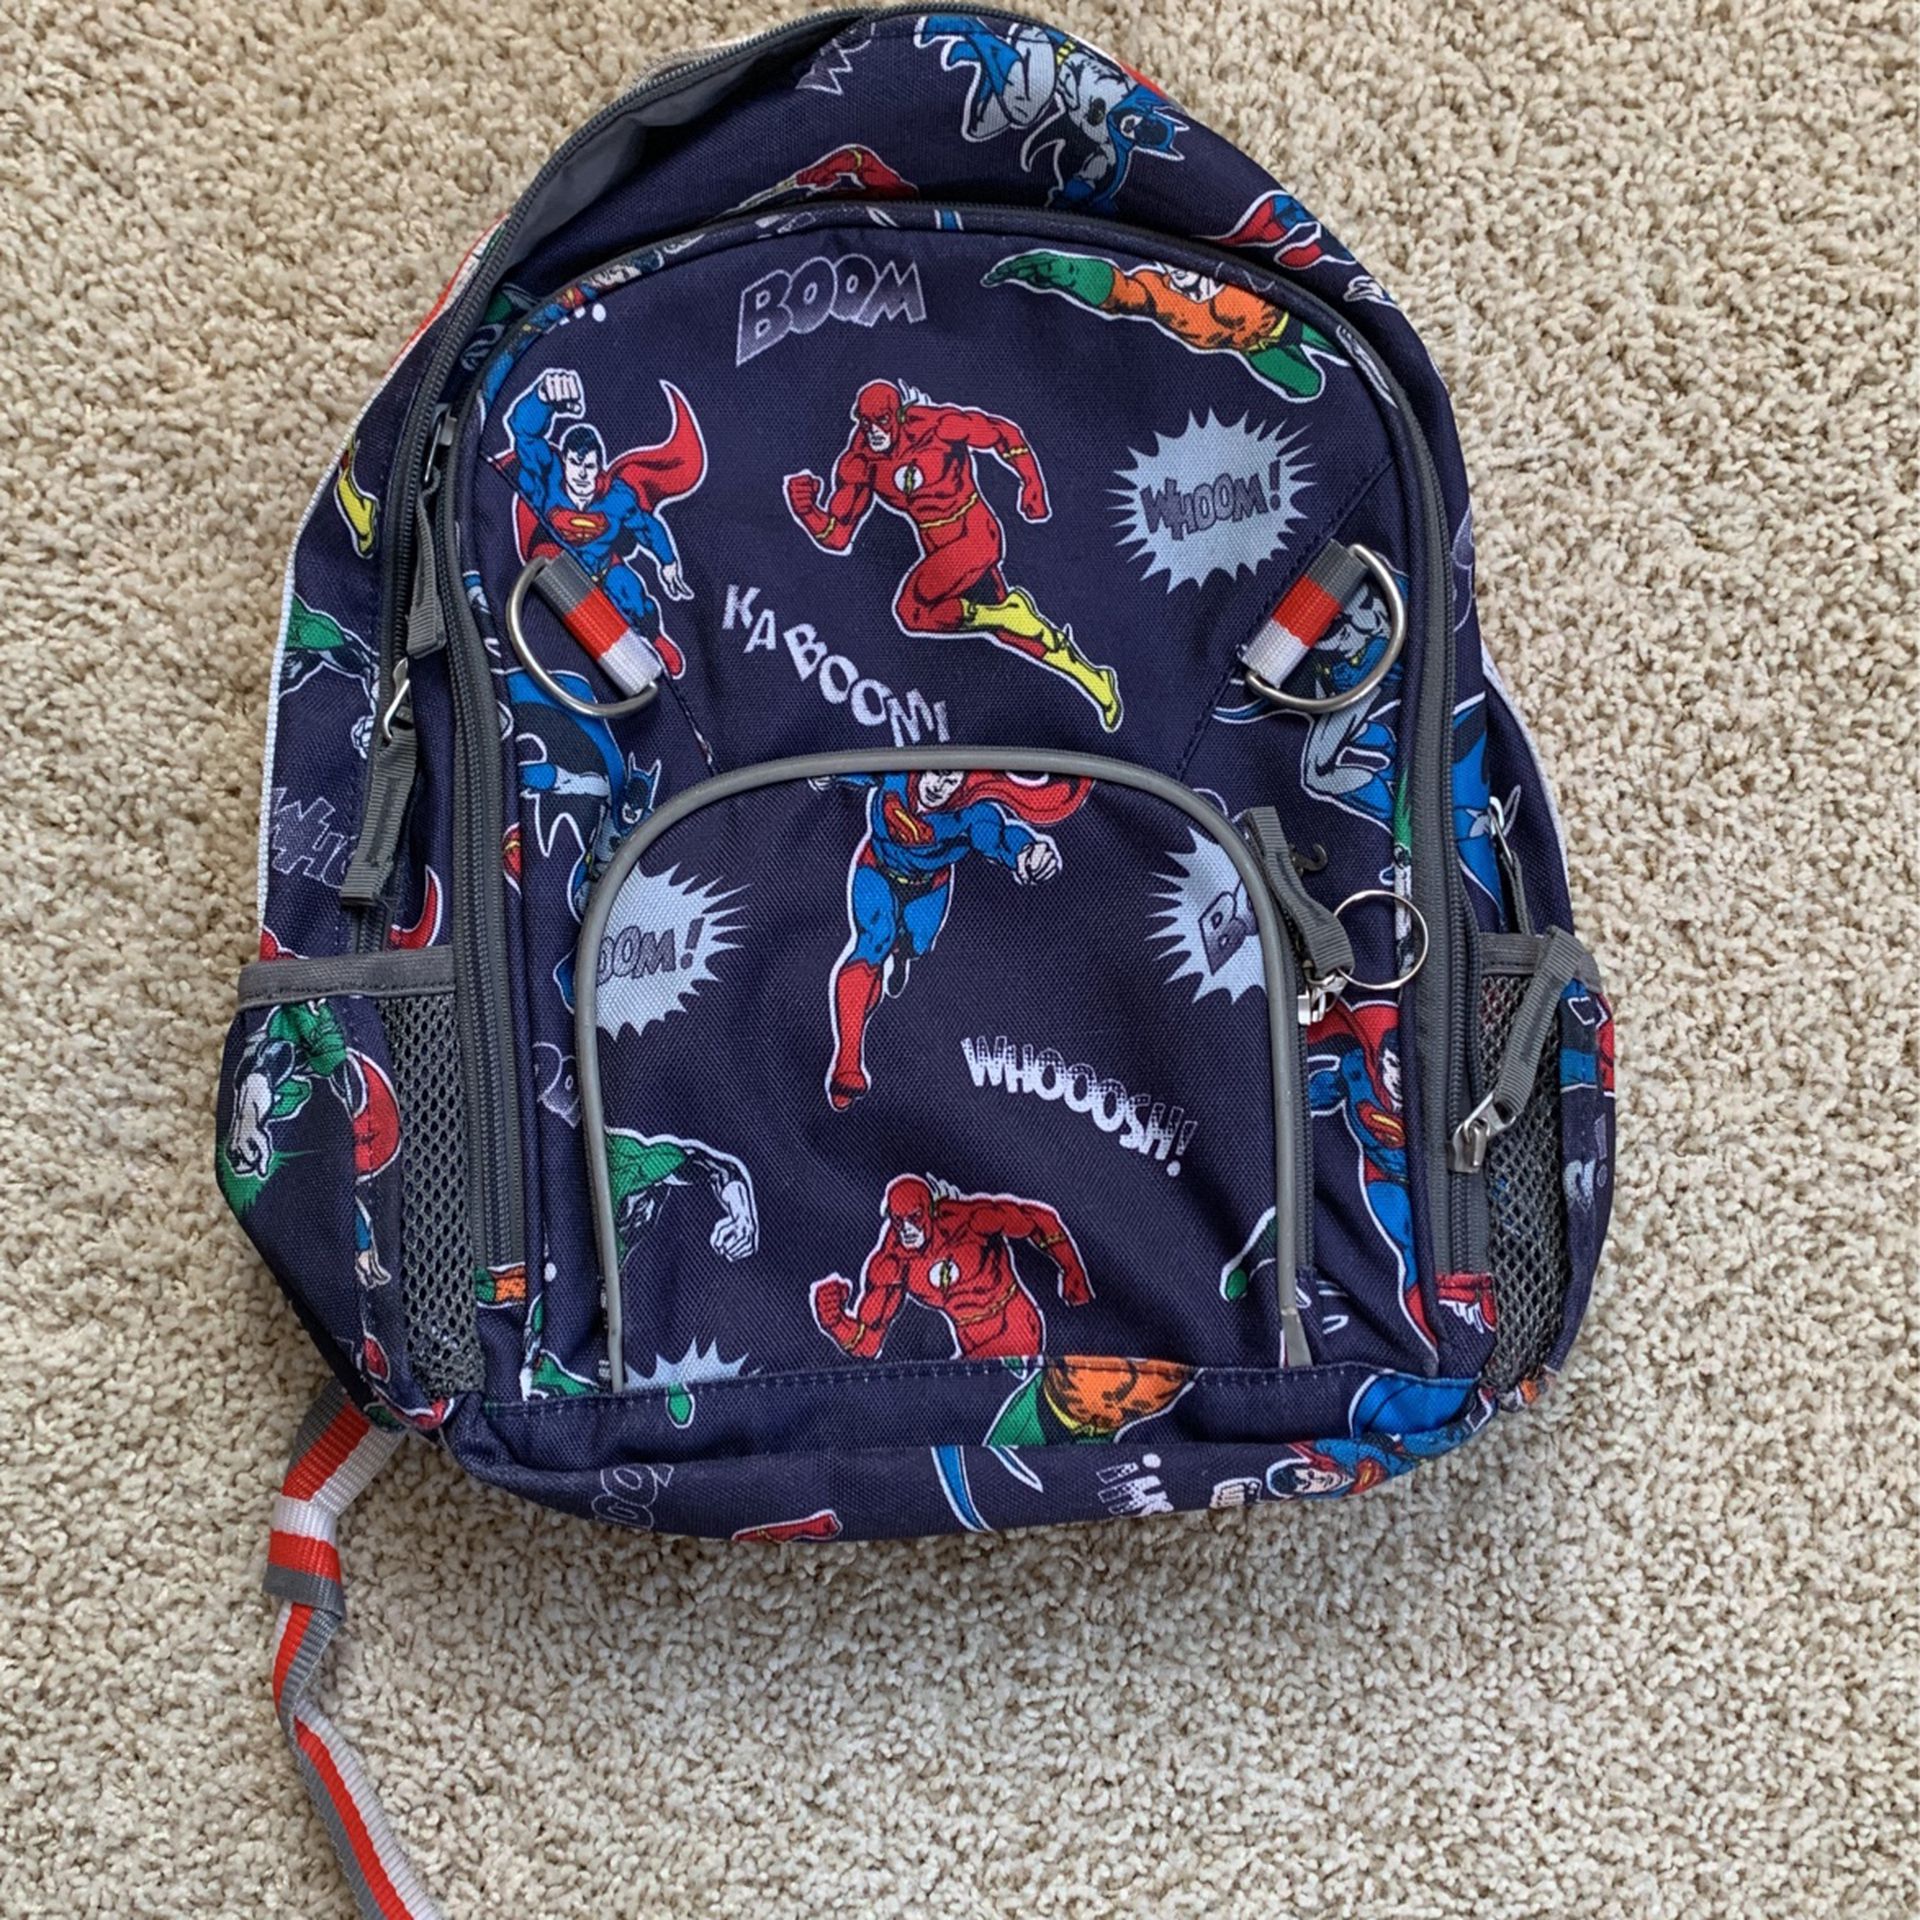 Pottery barn kids Backpack small